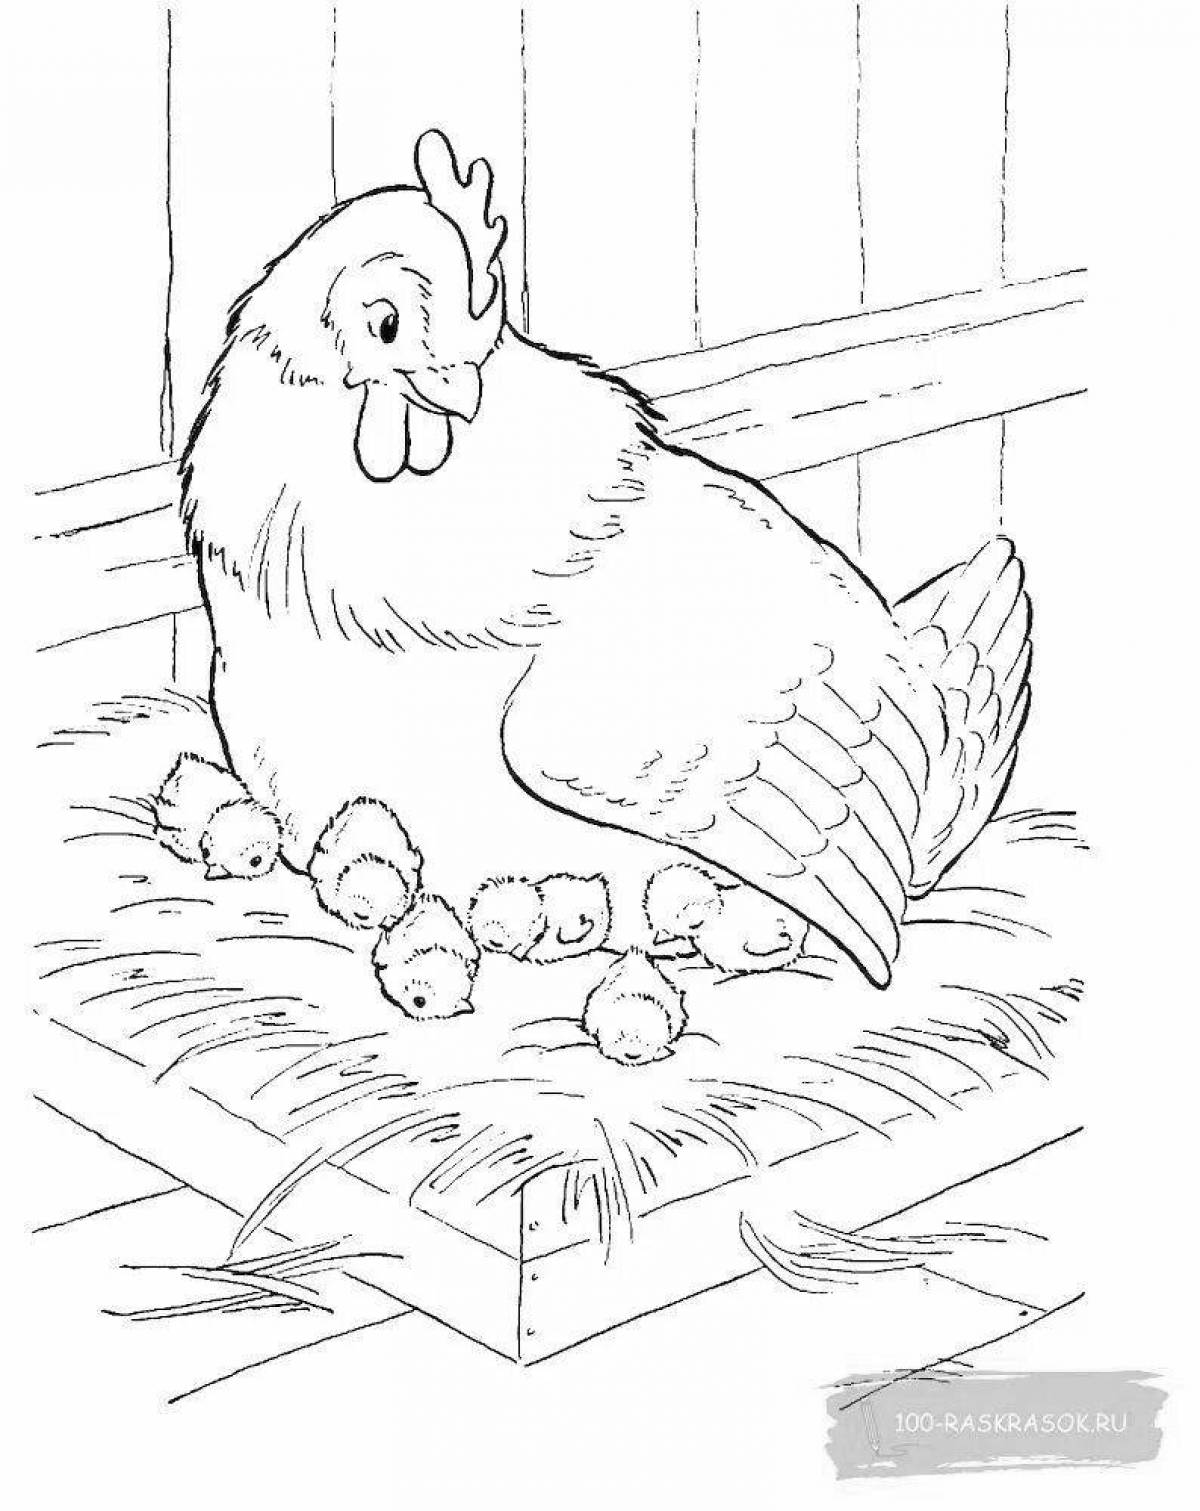 Hen with chicks #3